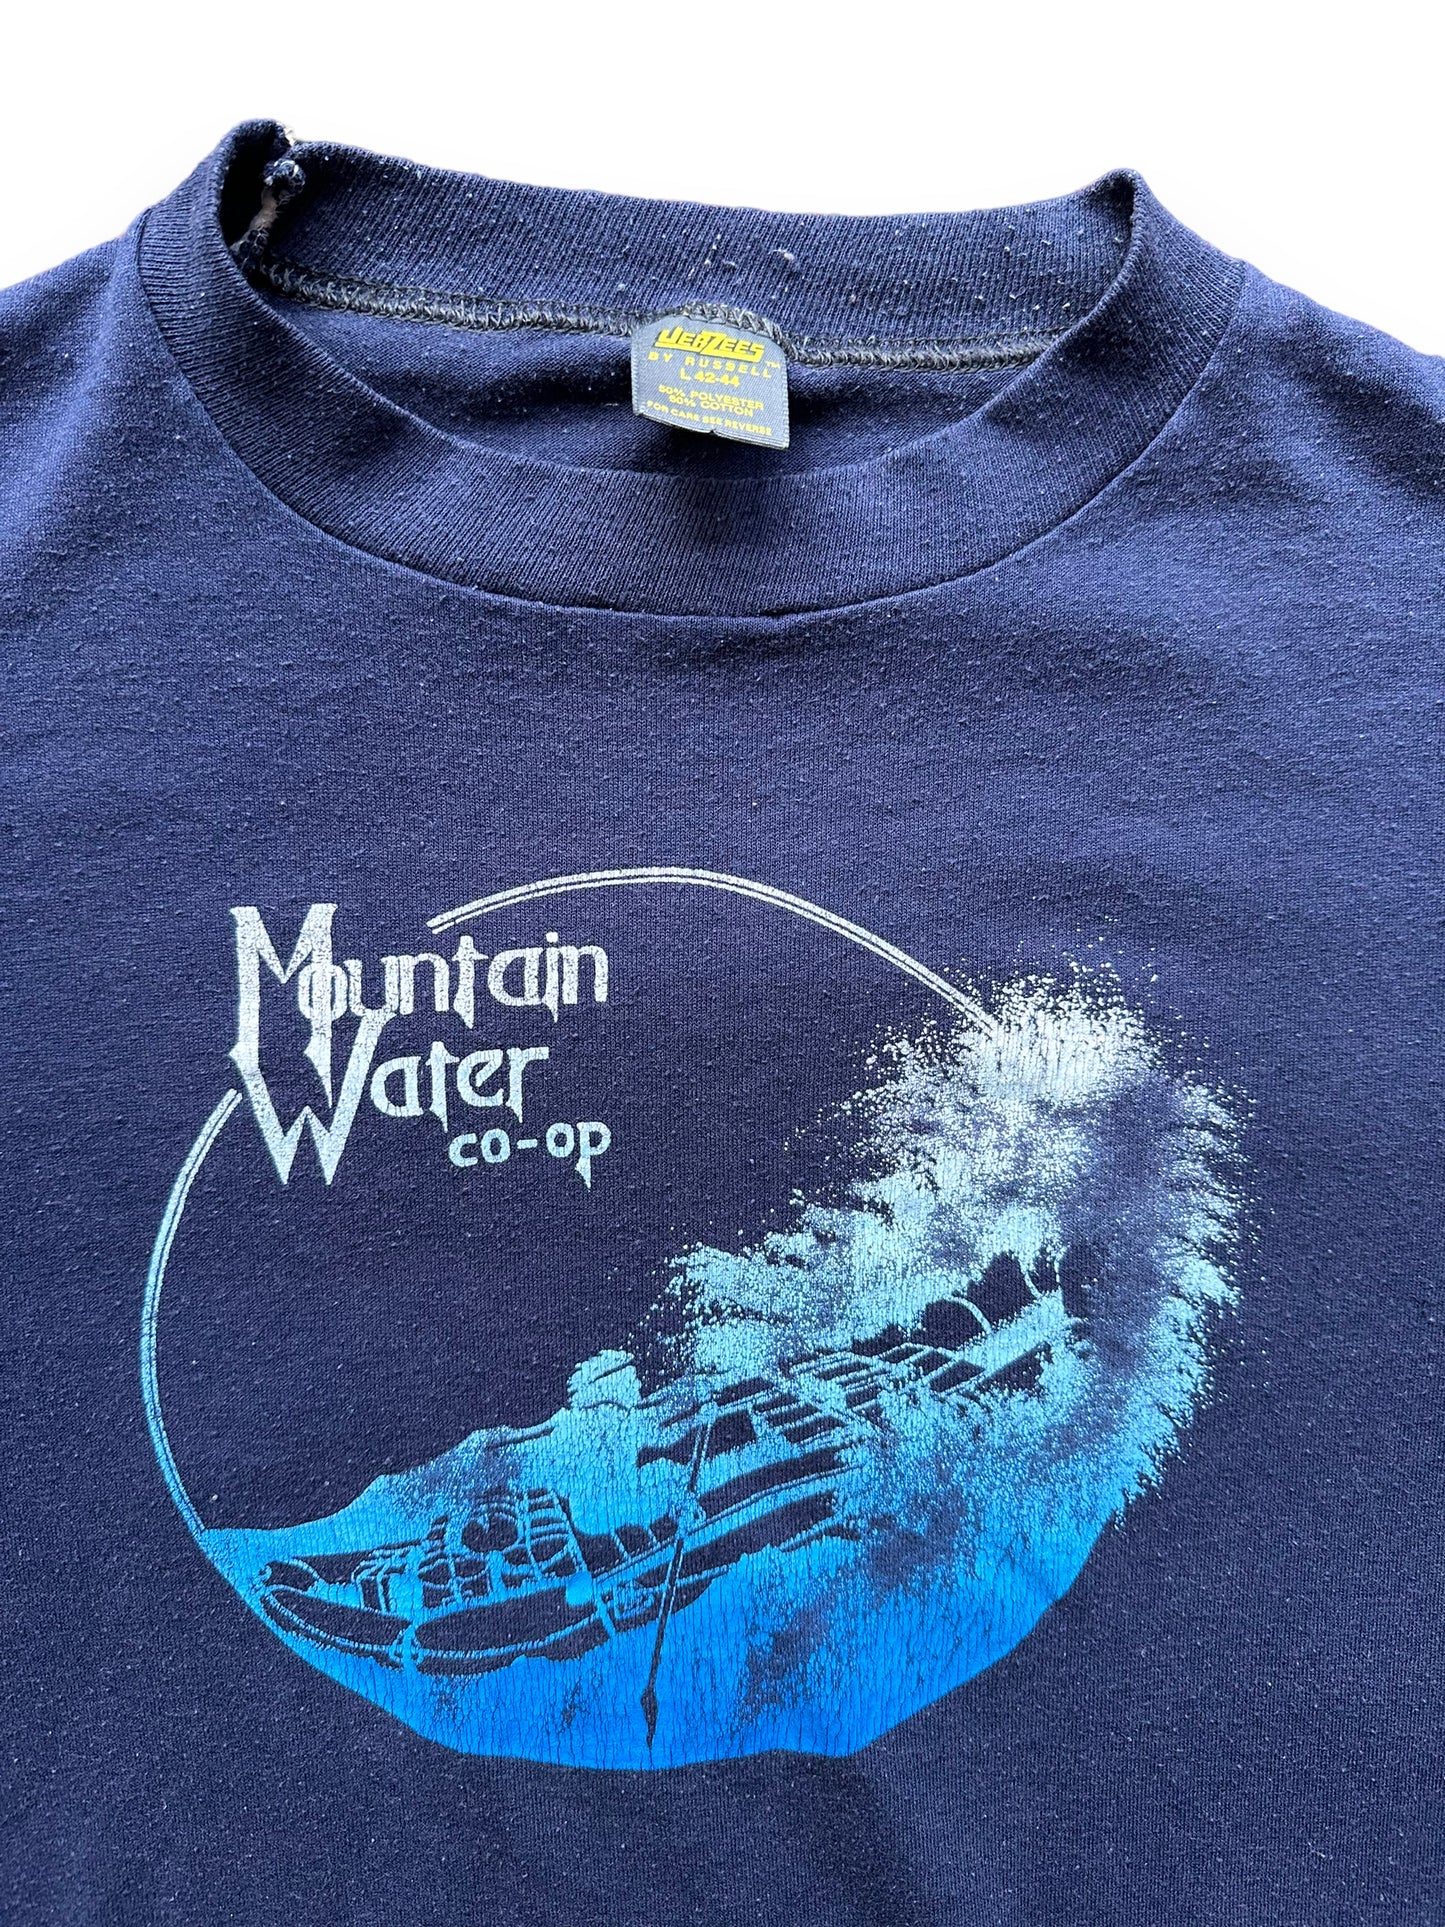 Vintage Mountain Water Co-op Tee SZ L | Vintage Graphic T-Shirts Seatt –  The Barn Owl